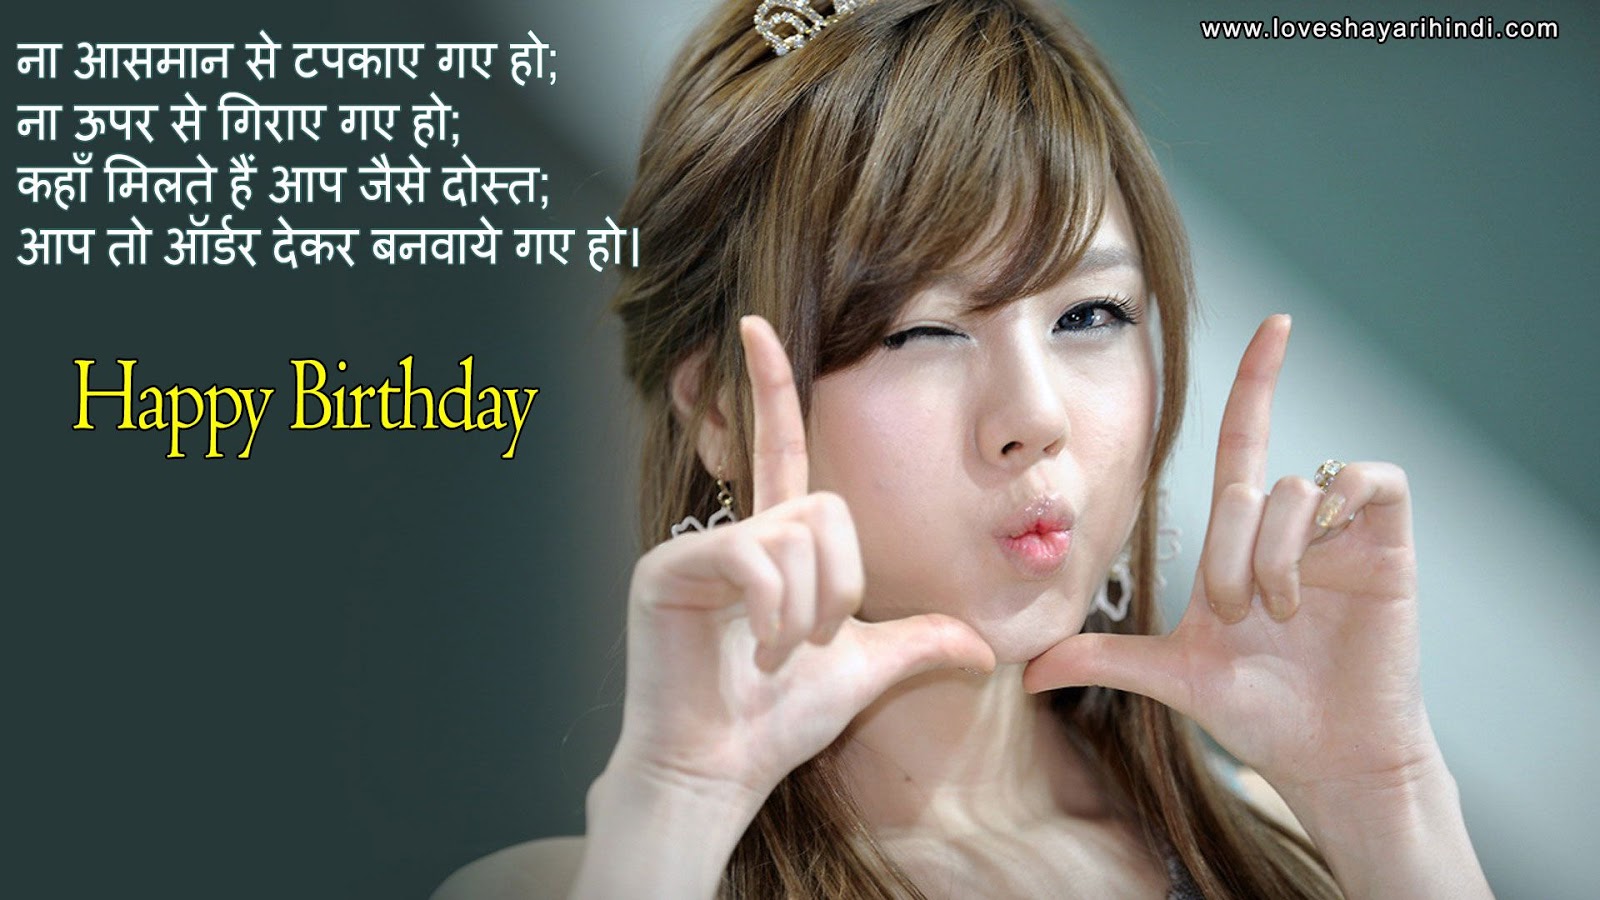 Funny Happy Birthday Wishes images in Hindi